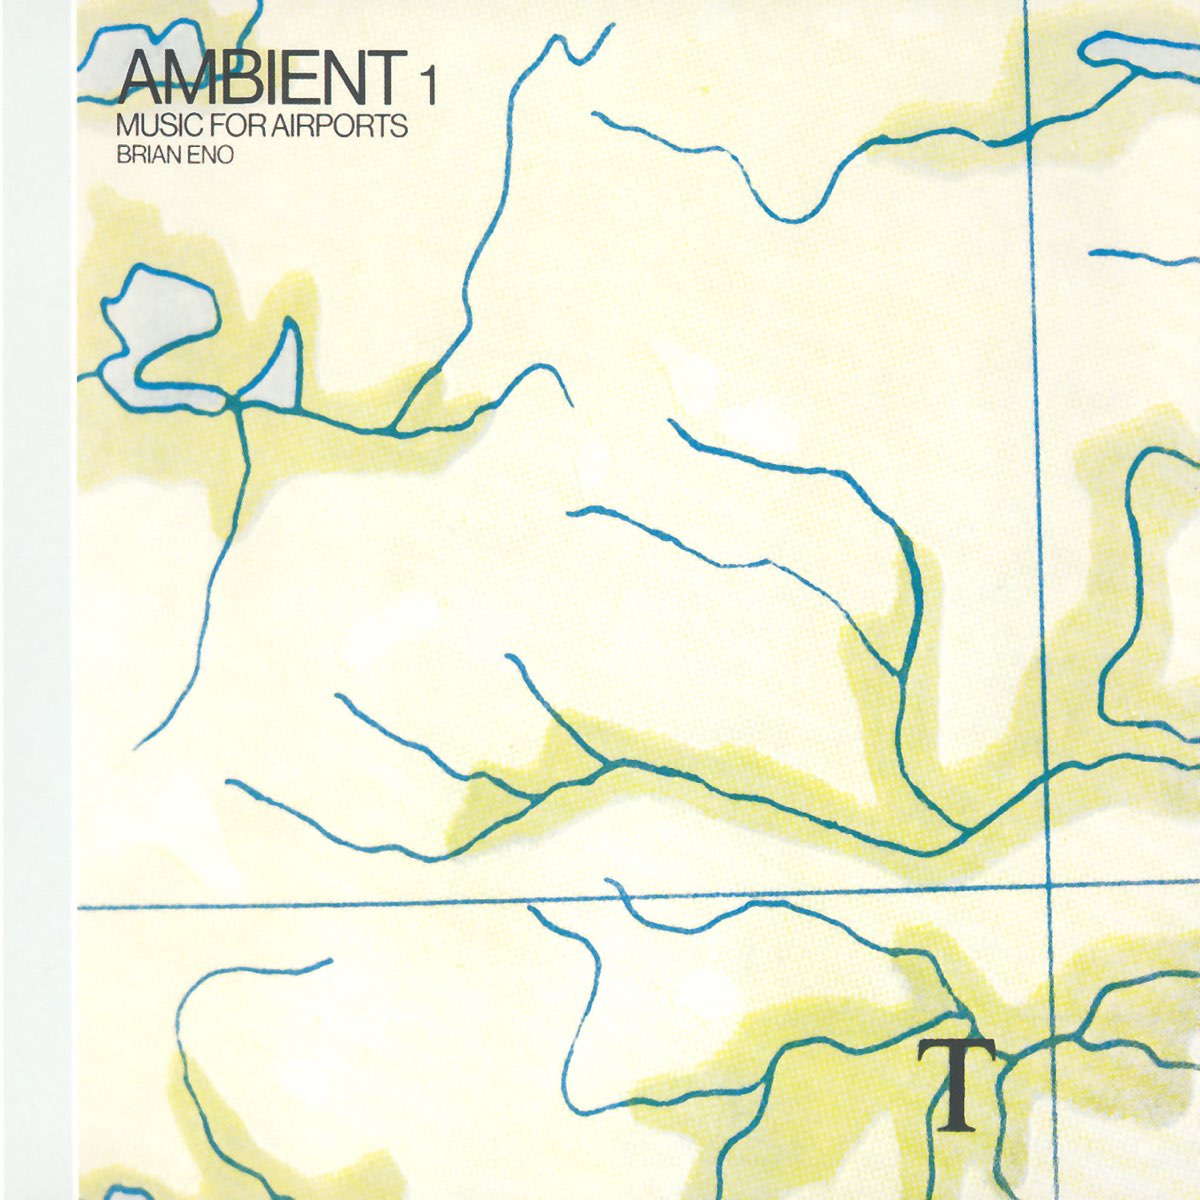 Eno, Brian: Ambient 1 (Music For Airports) (Vinyl LP)